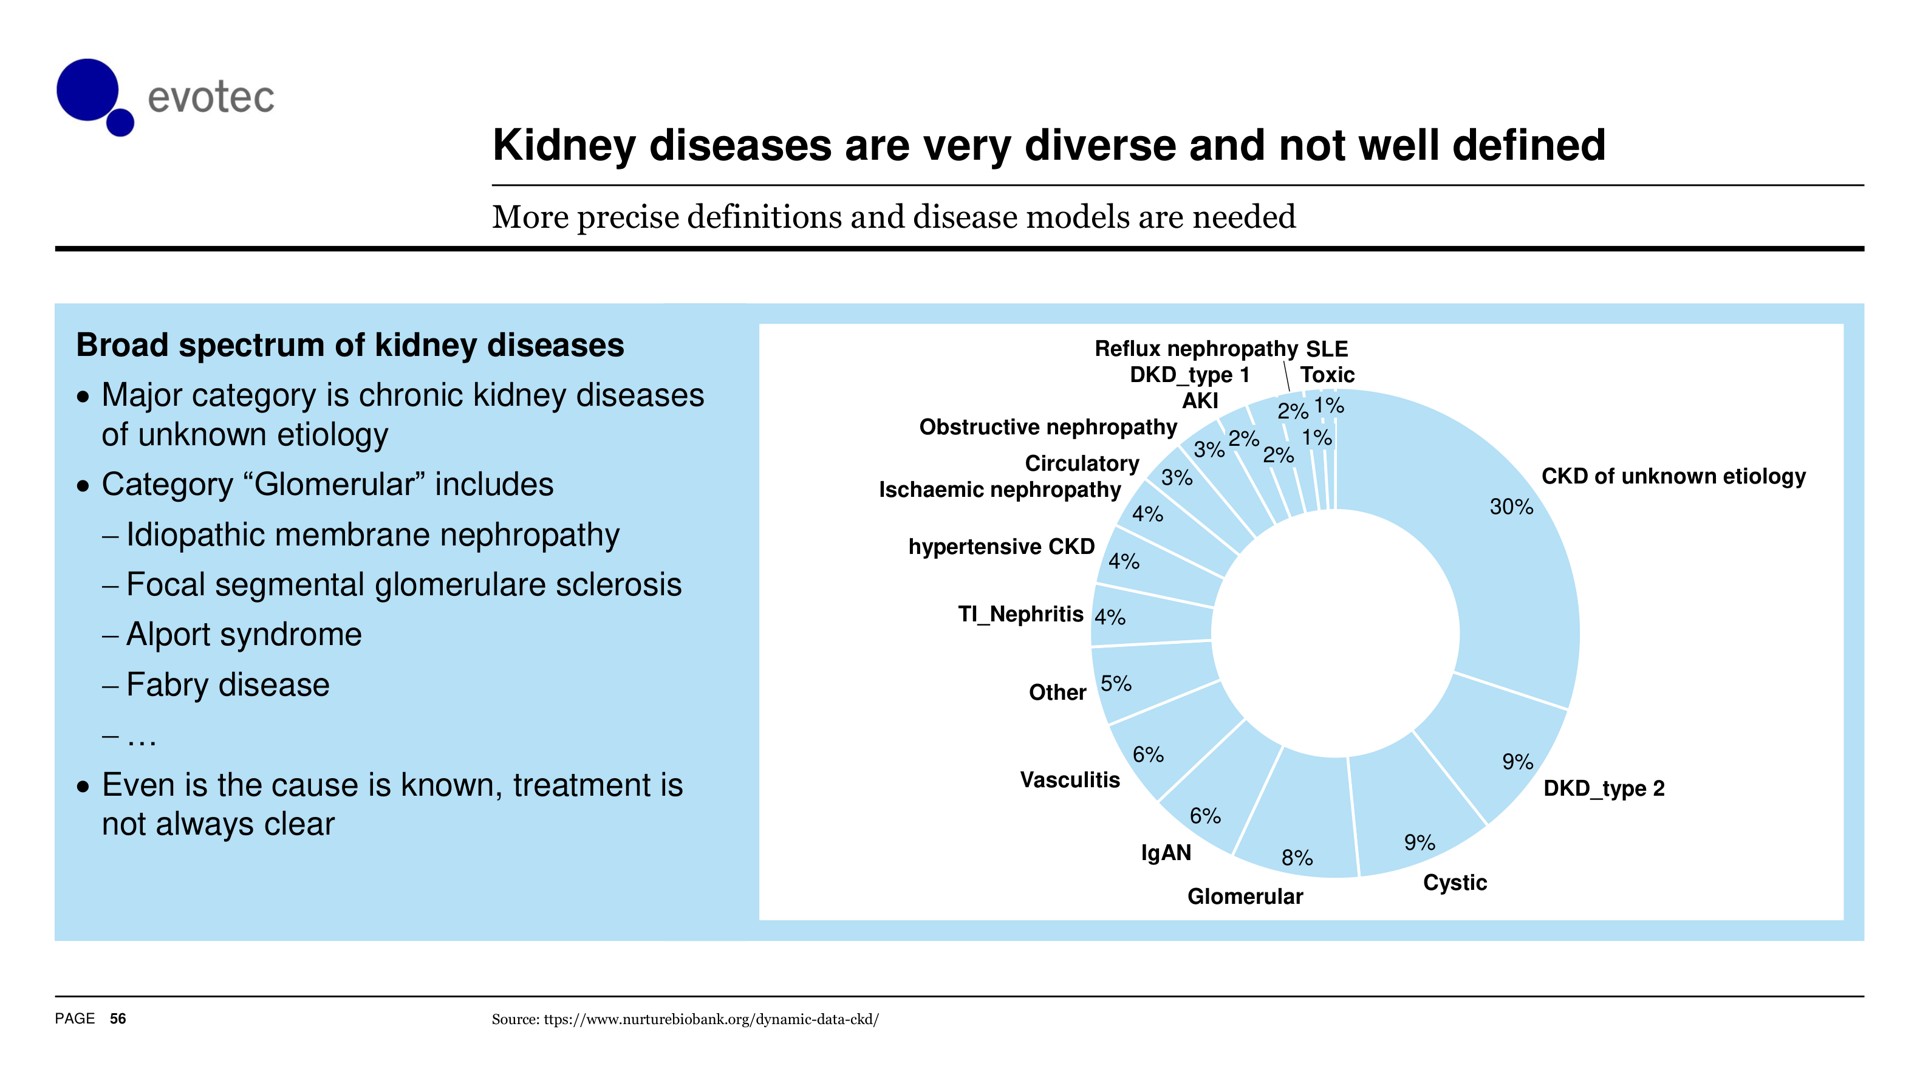 kidney diseases are very diverse and not well defined always clear | Evotec